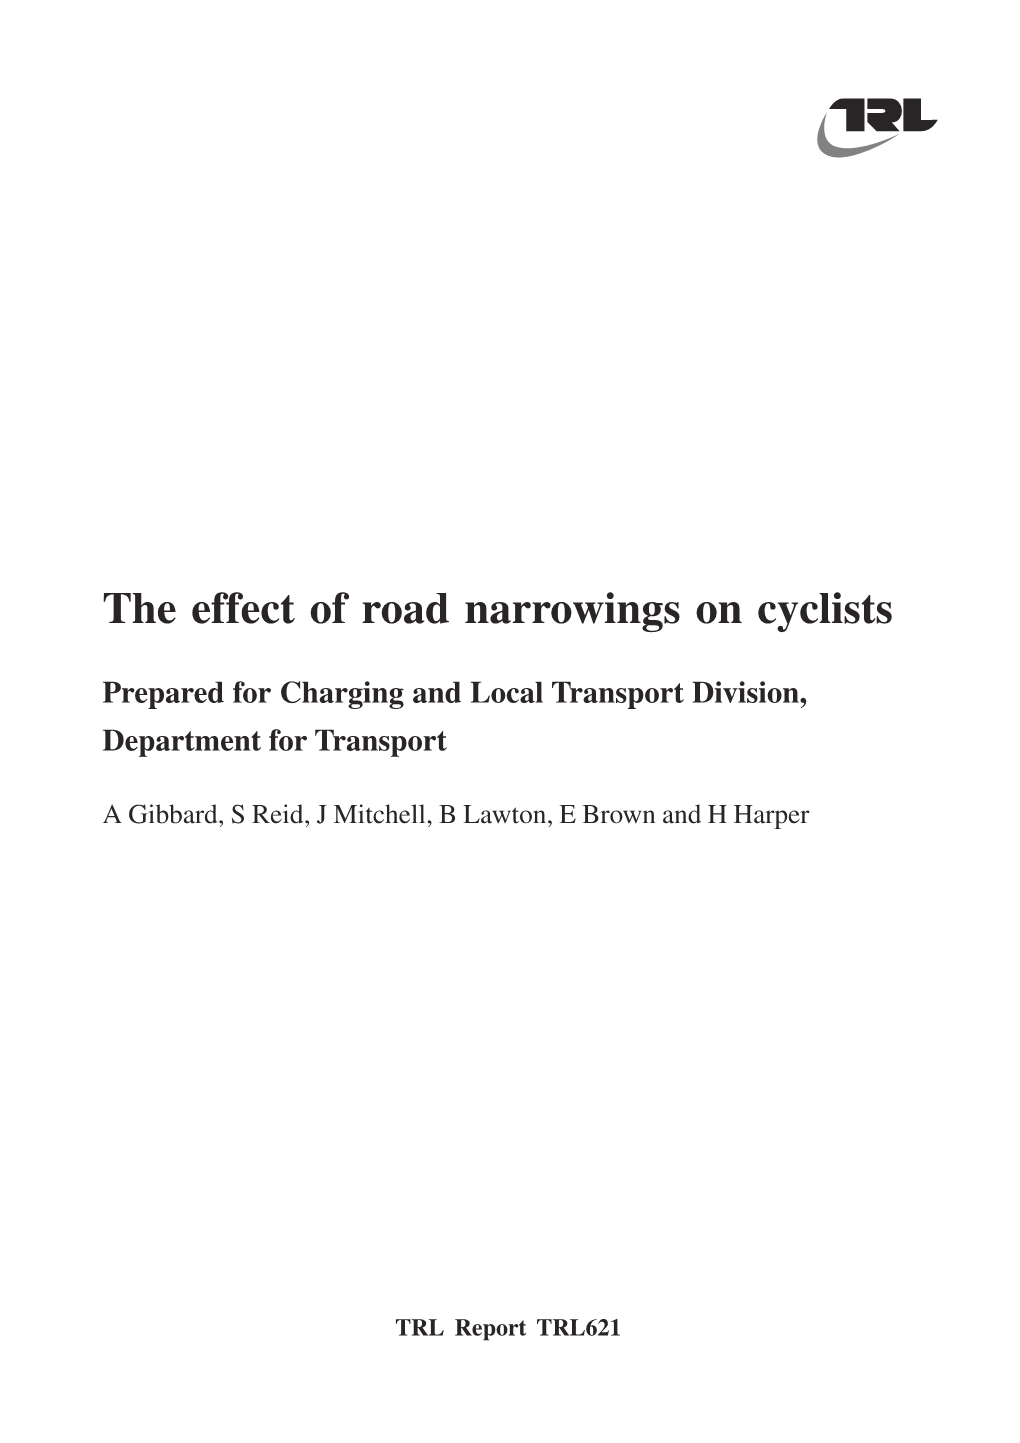 The Effect of Road Narrowings on Cyclists